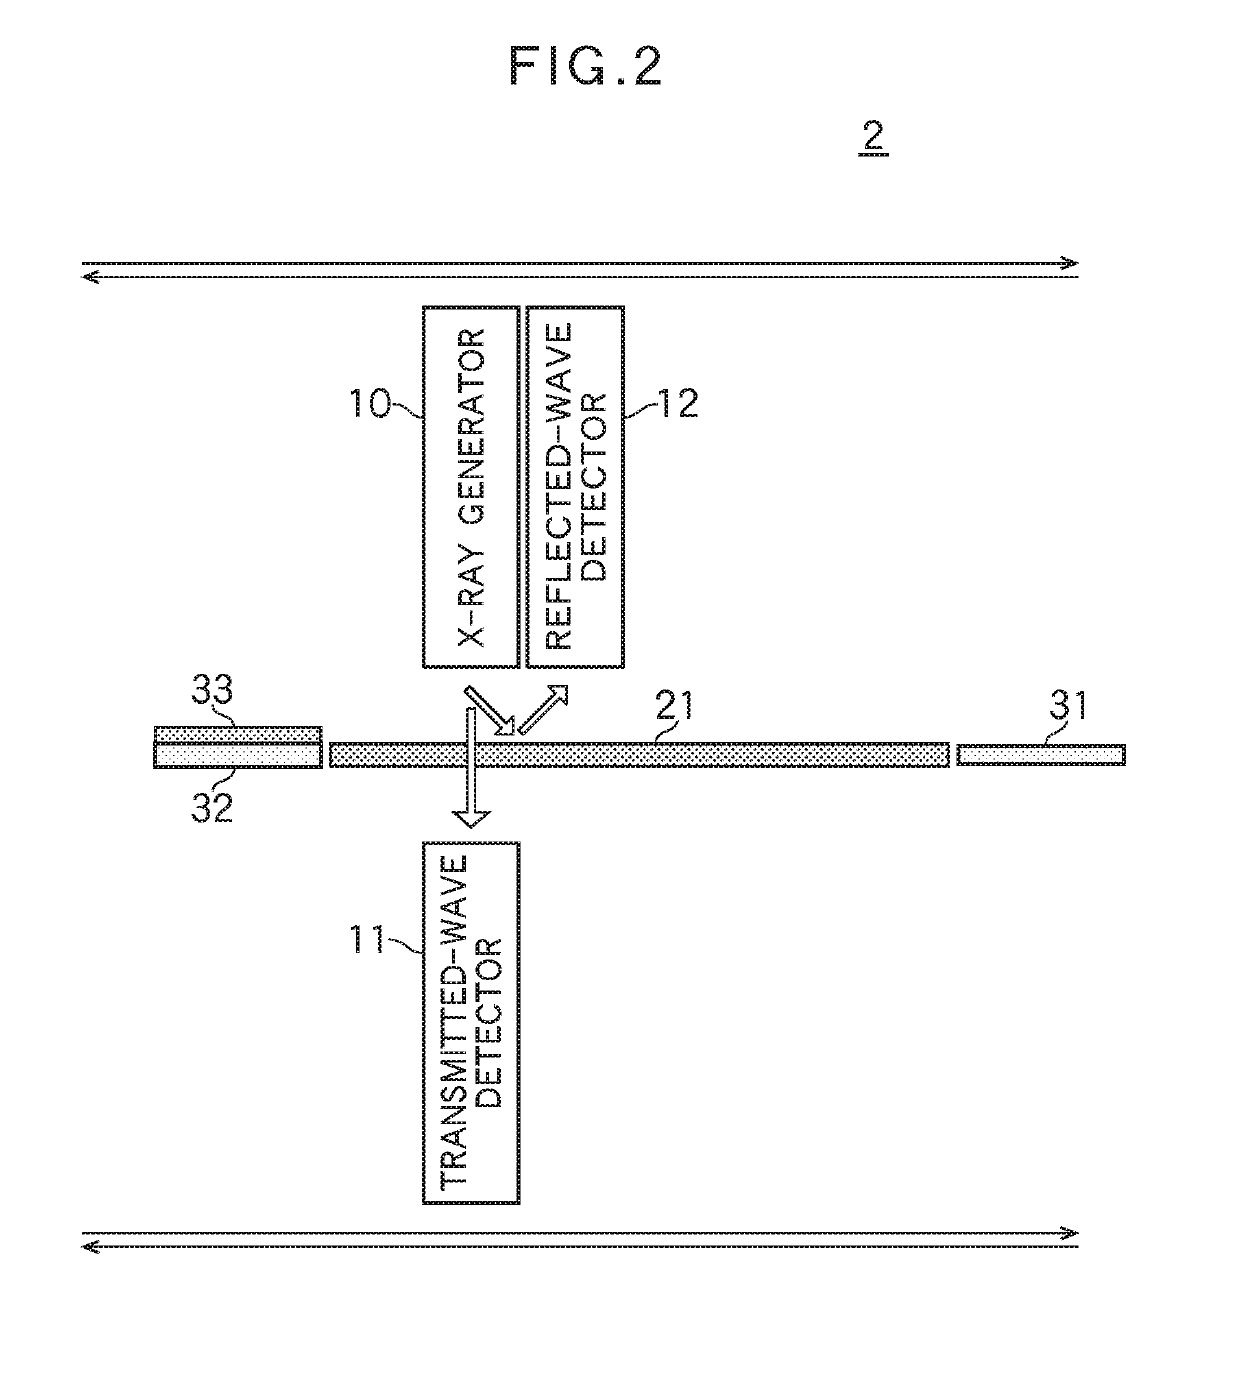 X-ray utilized compound measuring apparatus